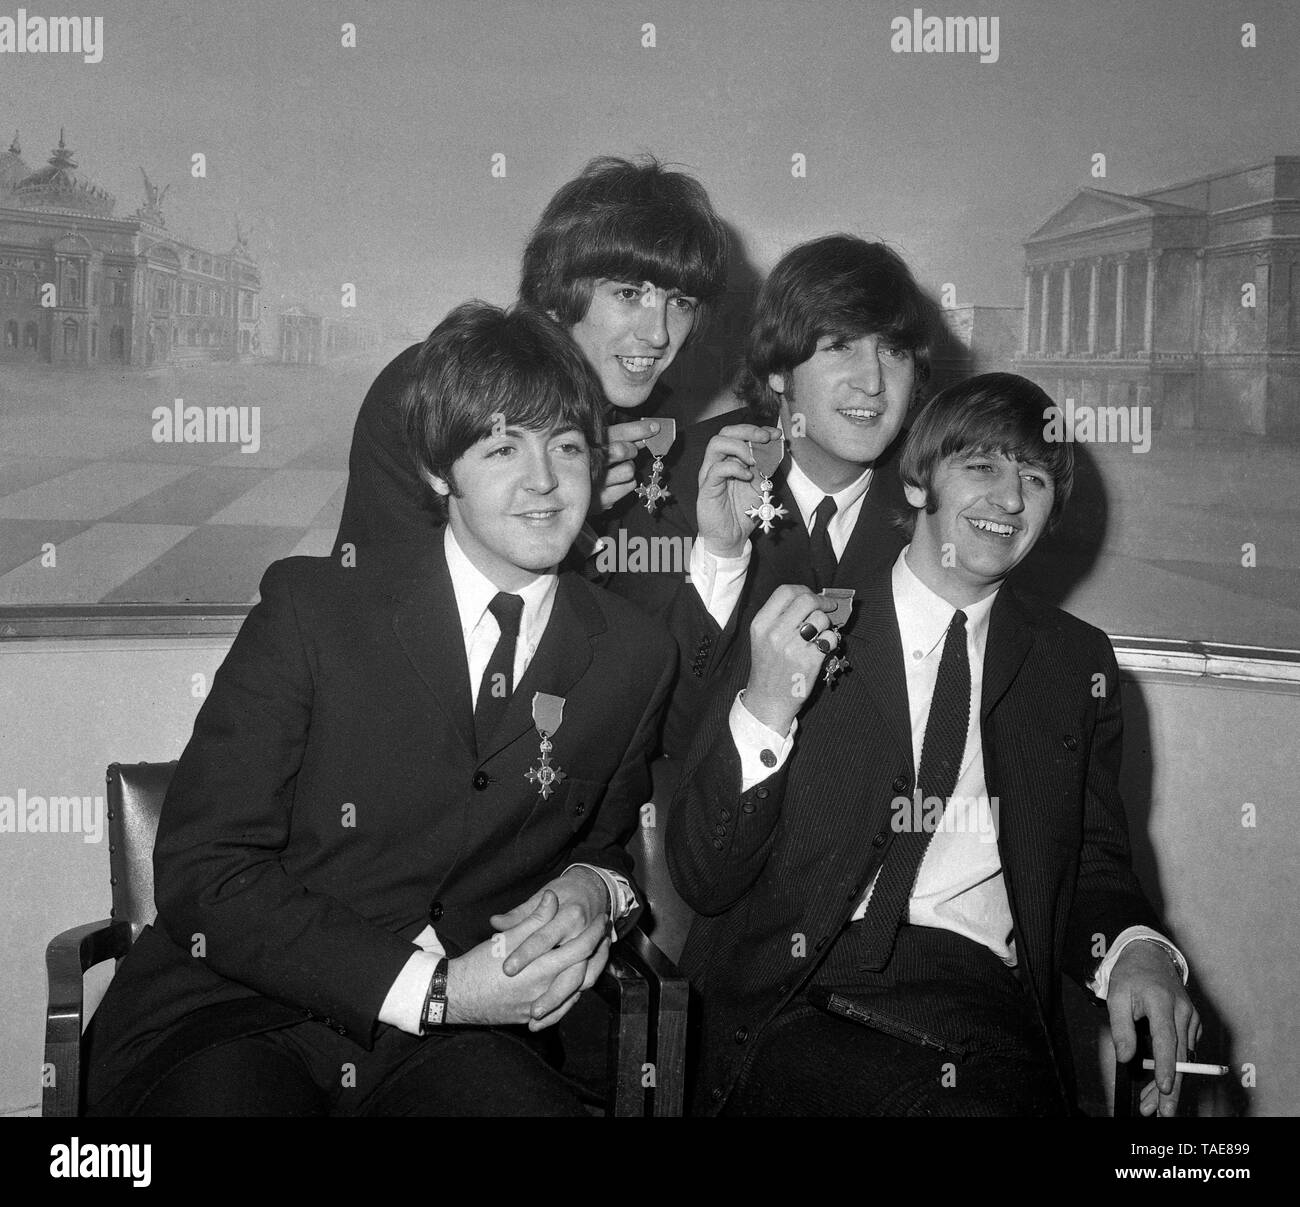 The four happy Beatles pop stars display their insignia as Members of ...